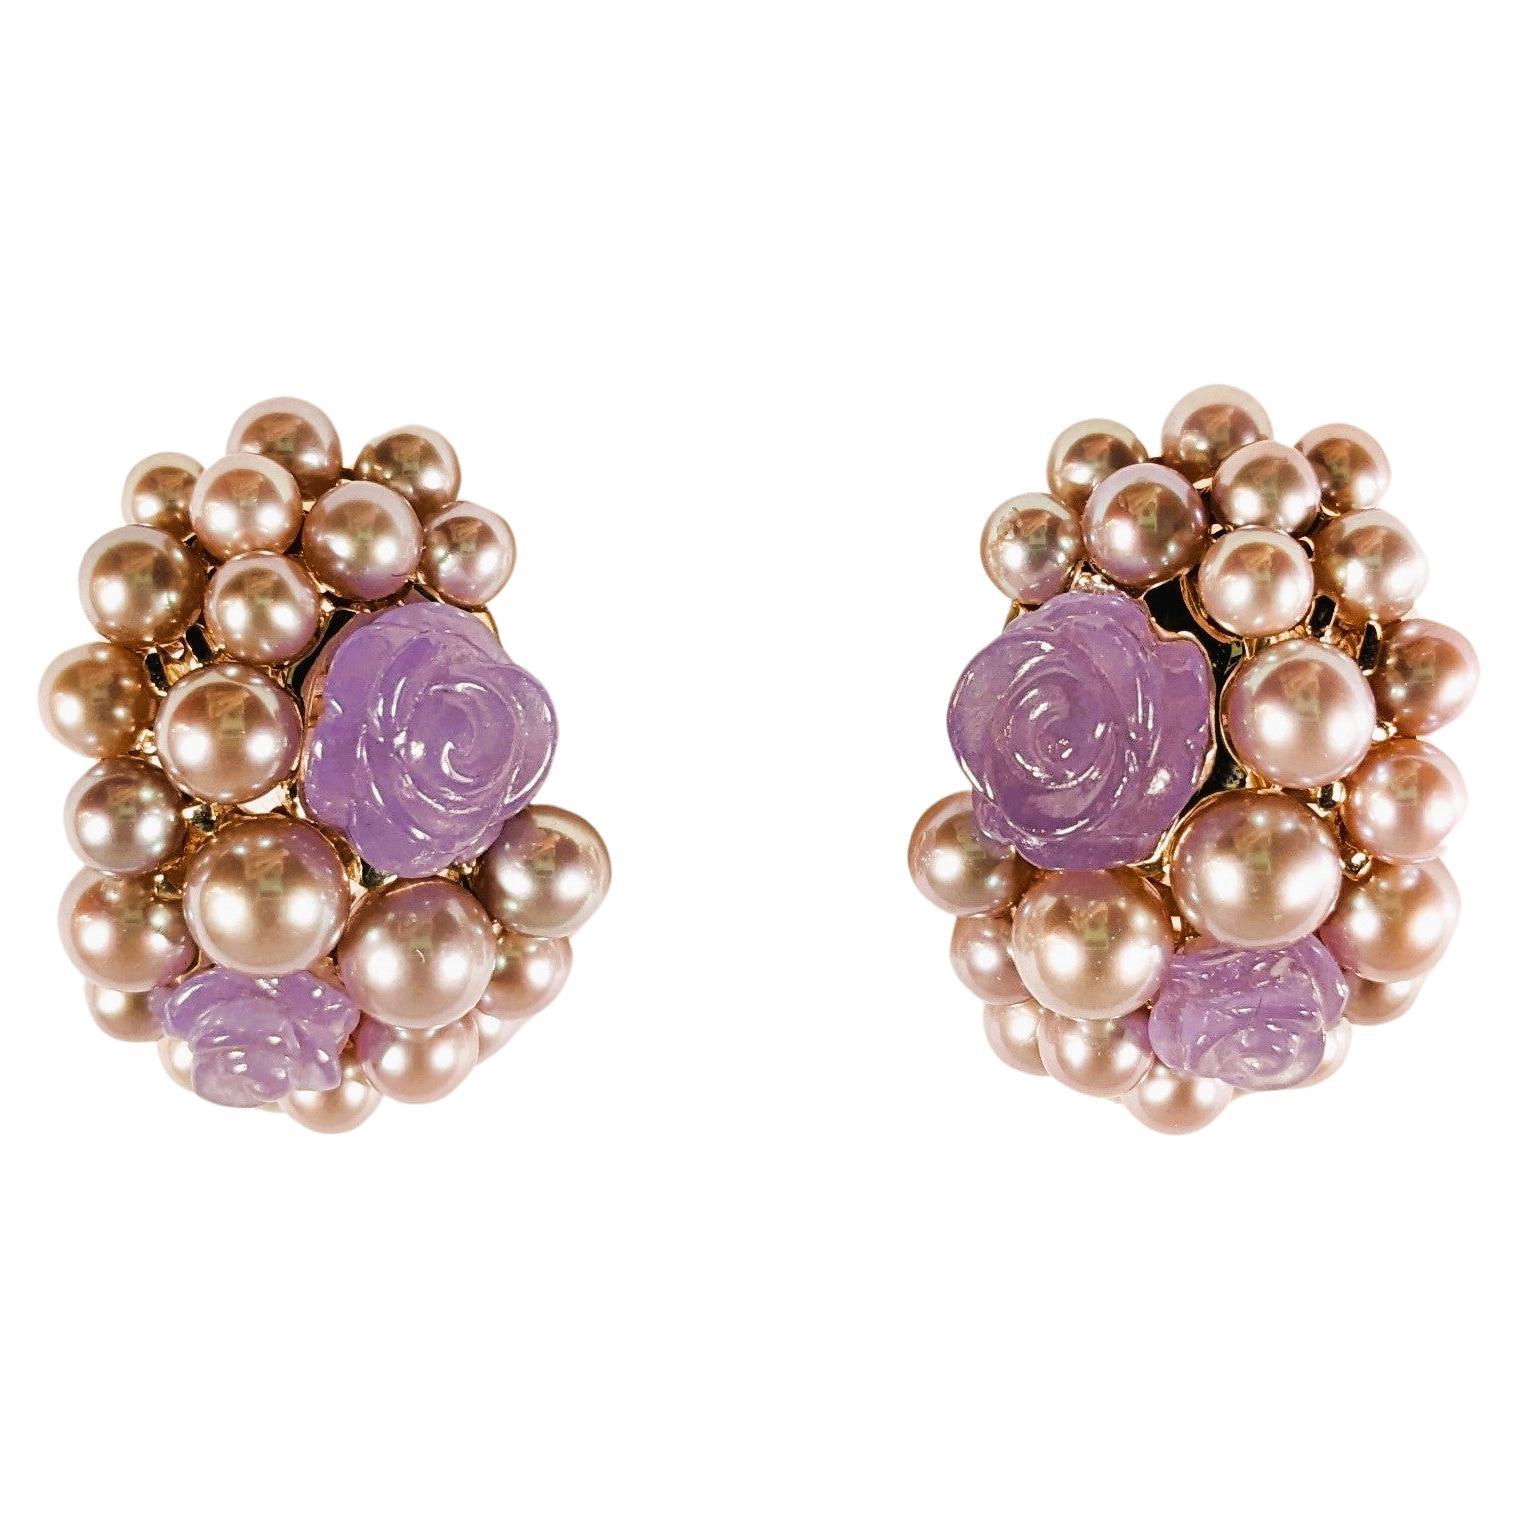 Vintage Mimi Milano 18K Rose Gold Earrings  Agate Flowers, Cultivated Pearls